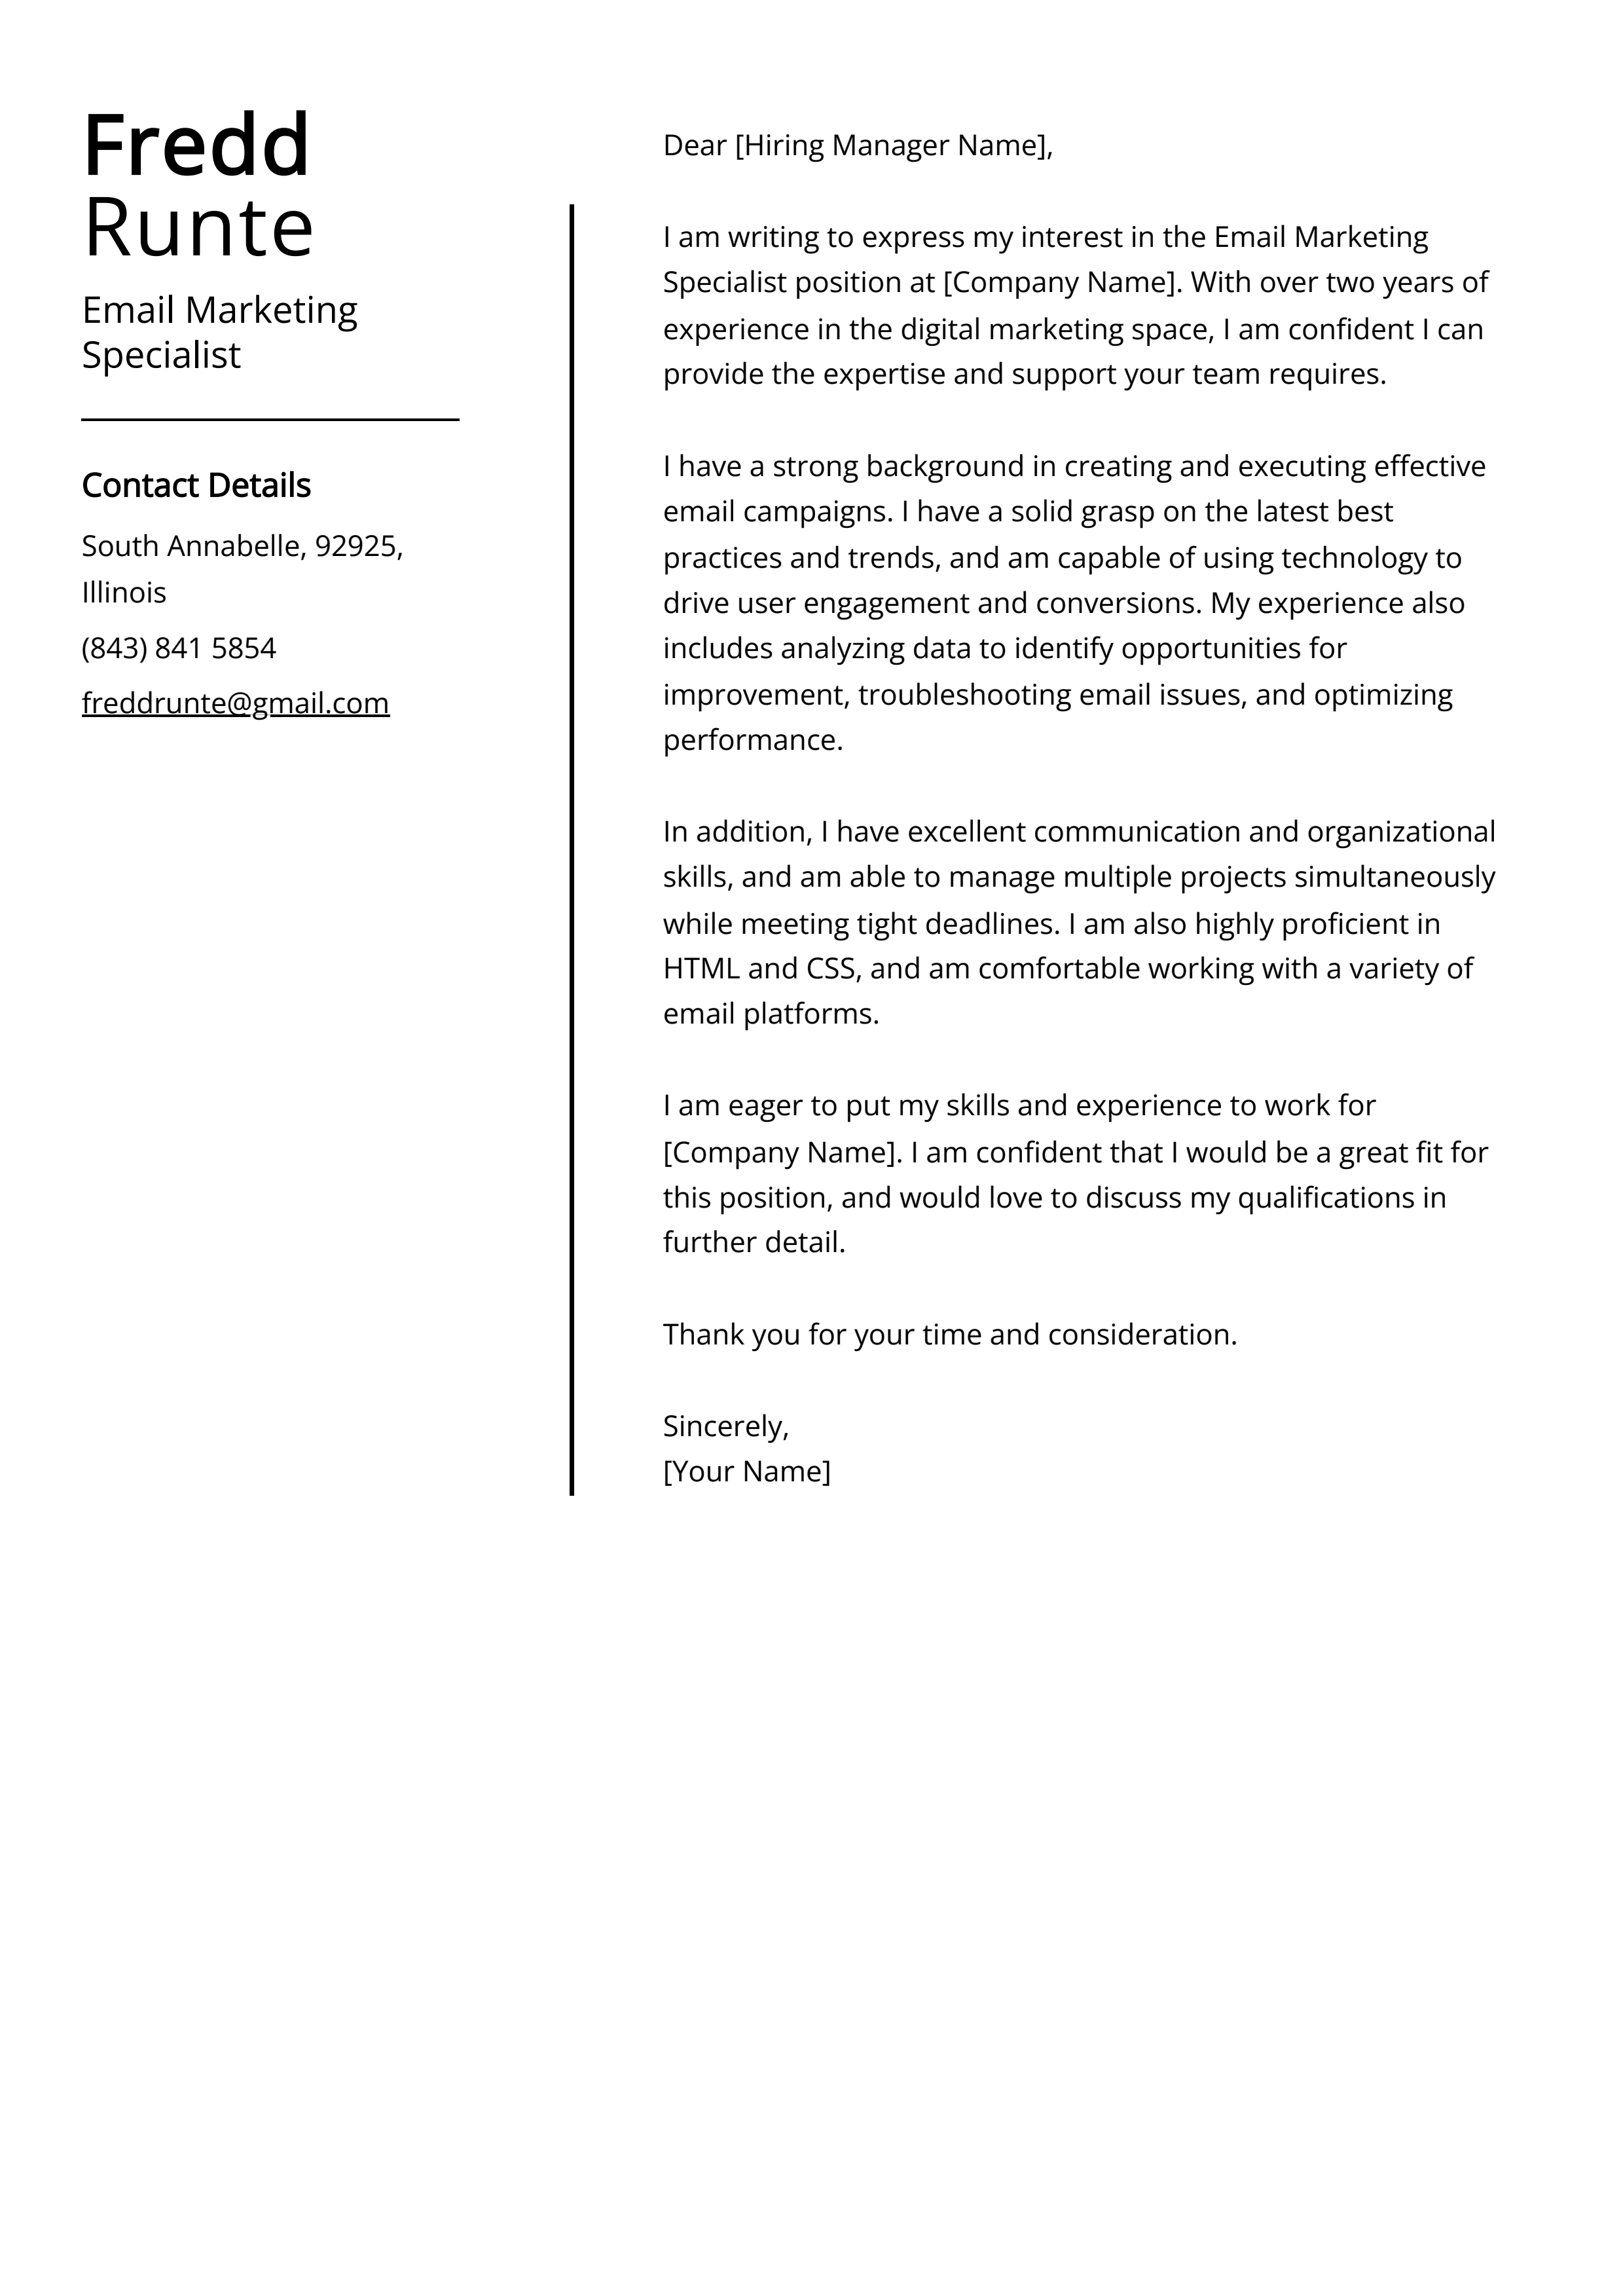 Email Marketing Specialist Cover Letter Example